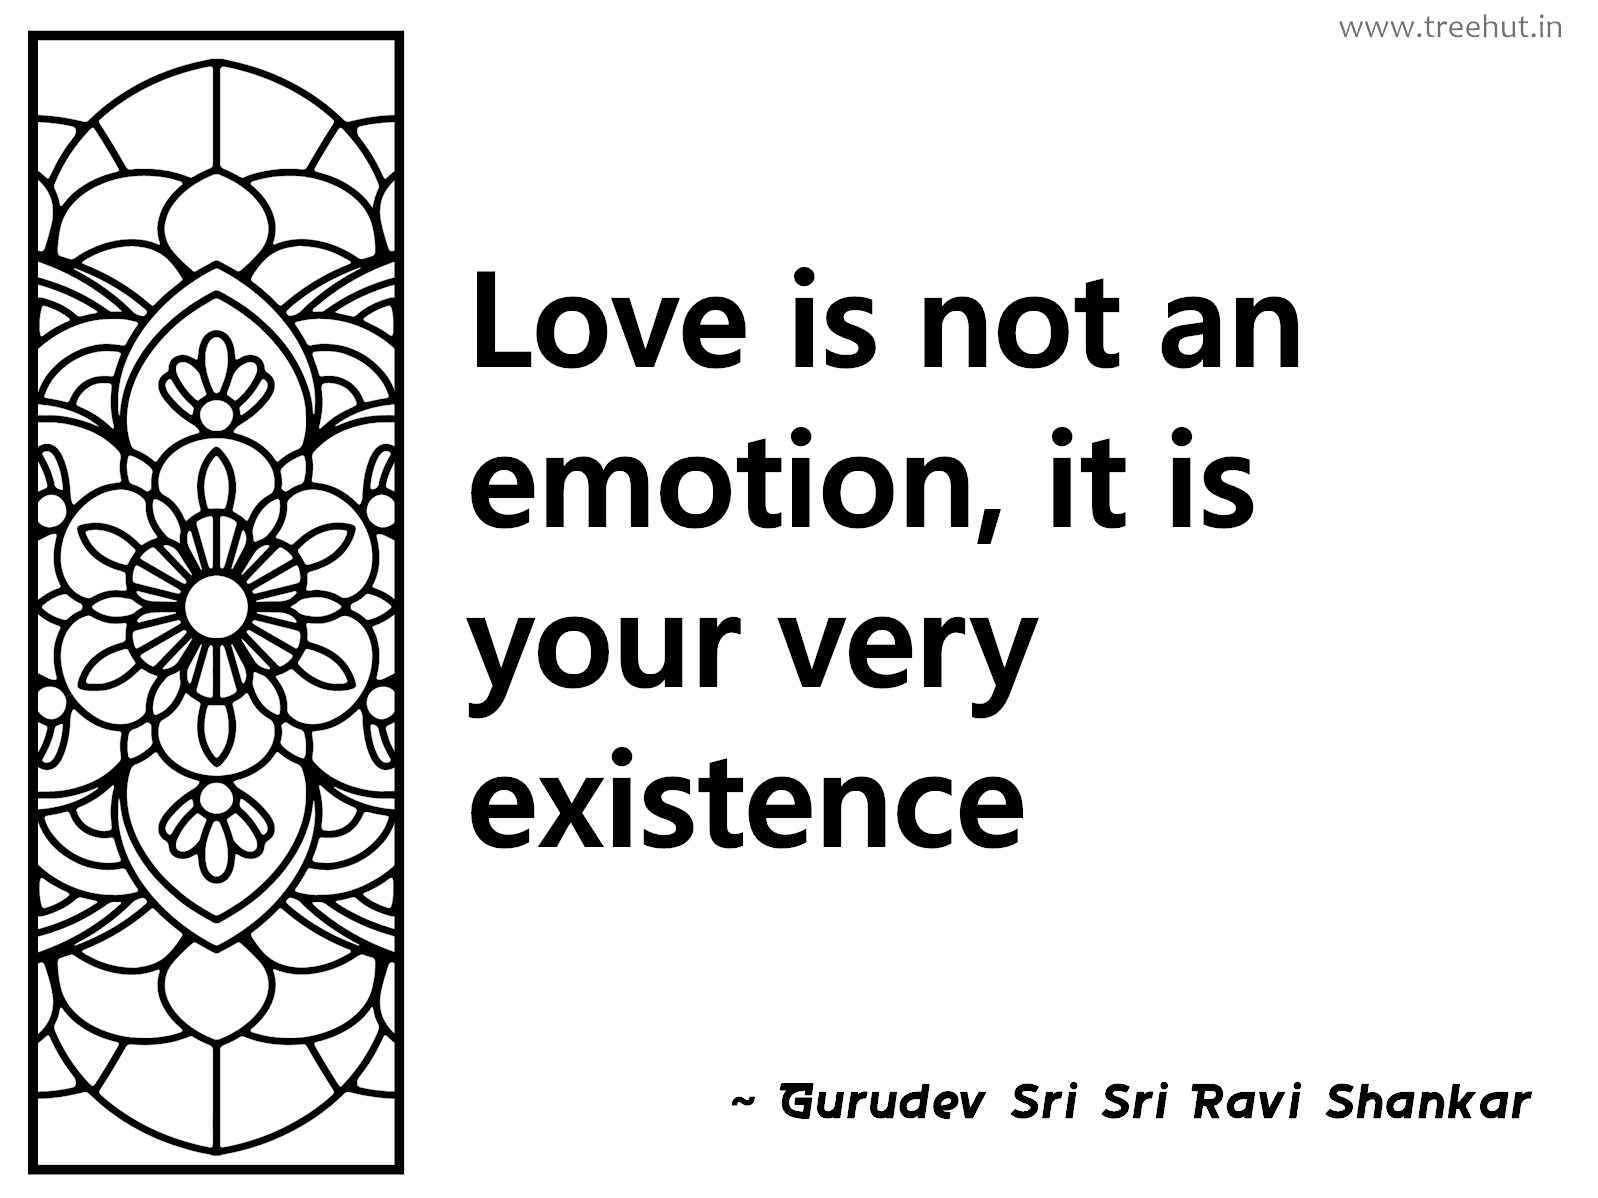 Love is not an emotion, it is your very existence Inspirational Quote by Gurudev Sri Sri Ravi Shankar, coloring pages